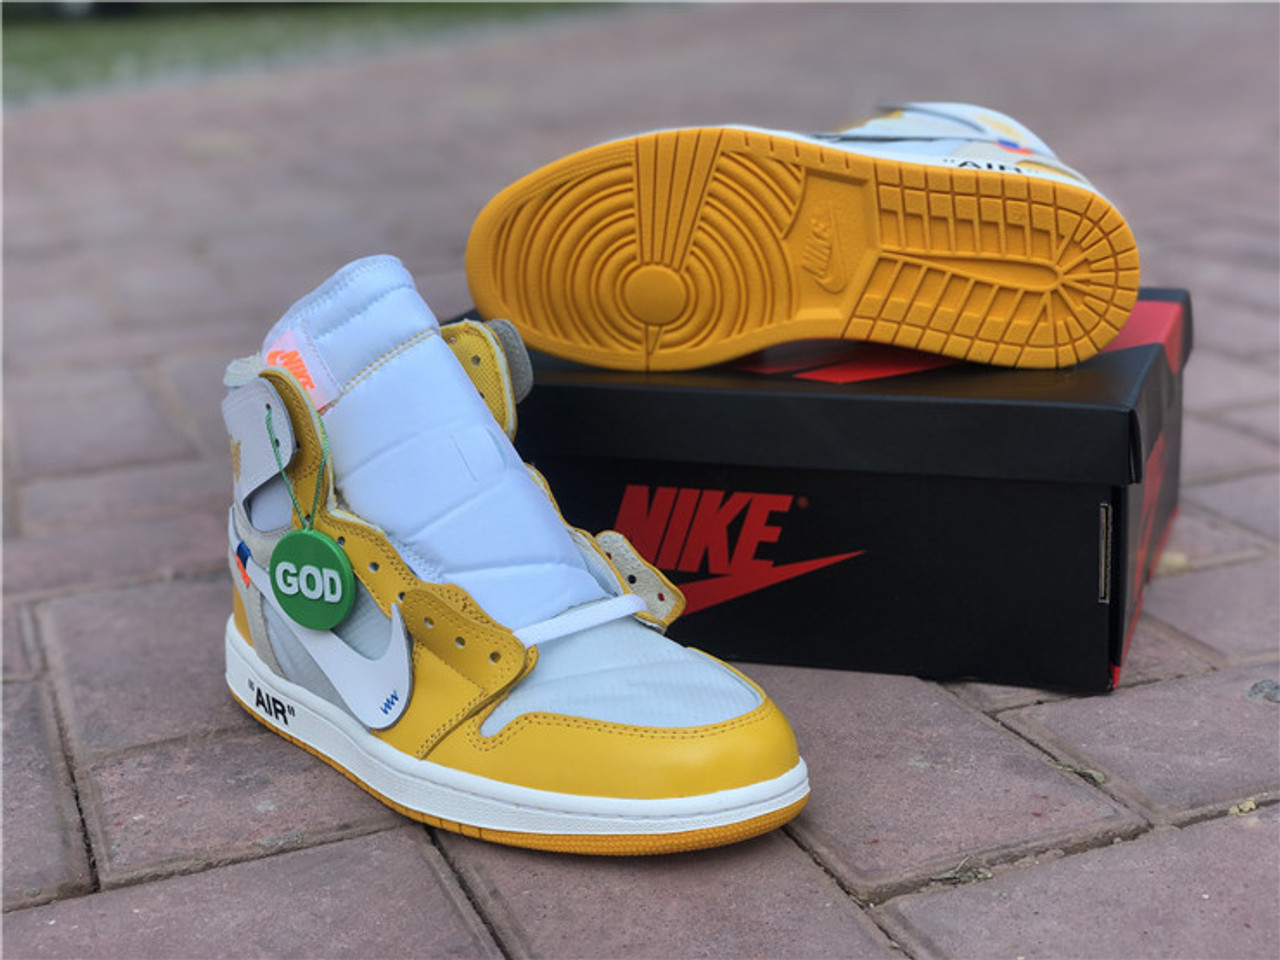 where to buy the best stockX UA High quality replica off-white x nike air jordan 1 “CANARY YELLOW” colorway sneakers Hypedripz is the best high quality trusted clone fake designer hypebeast